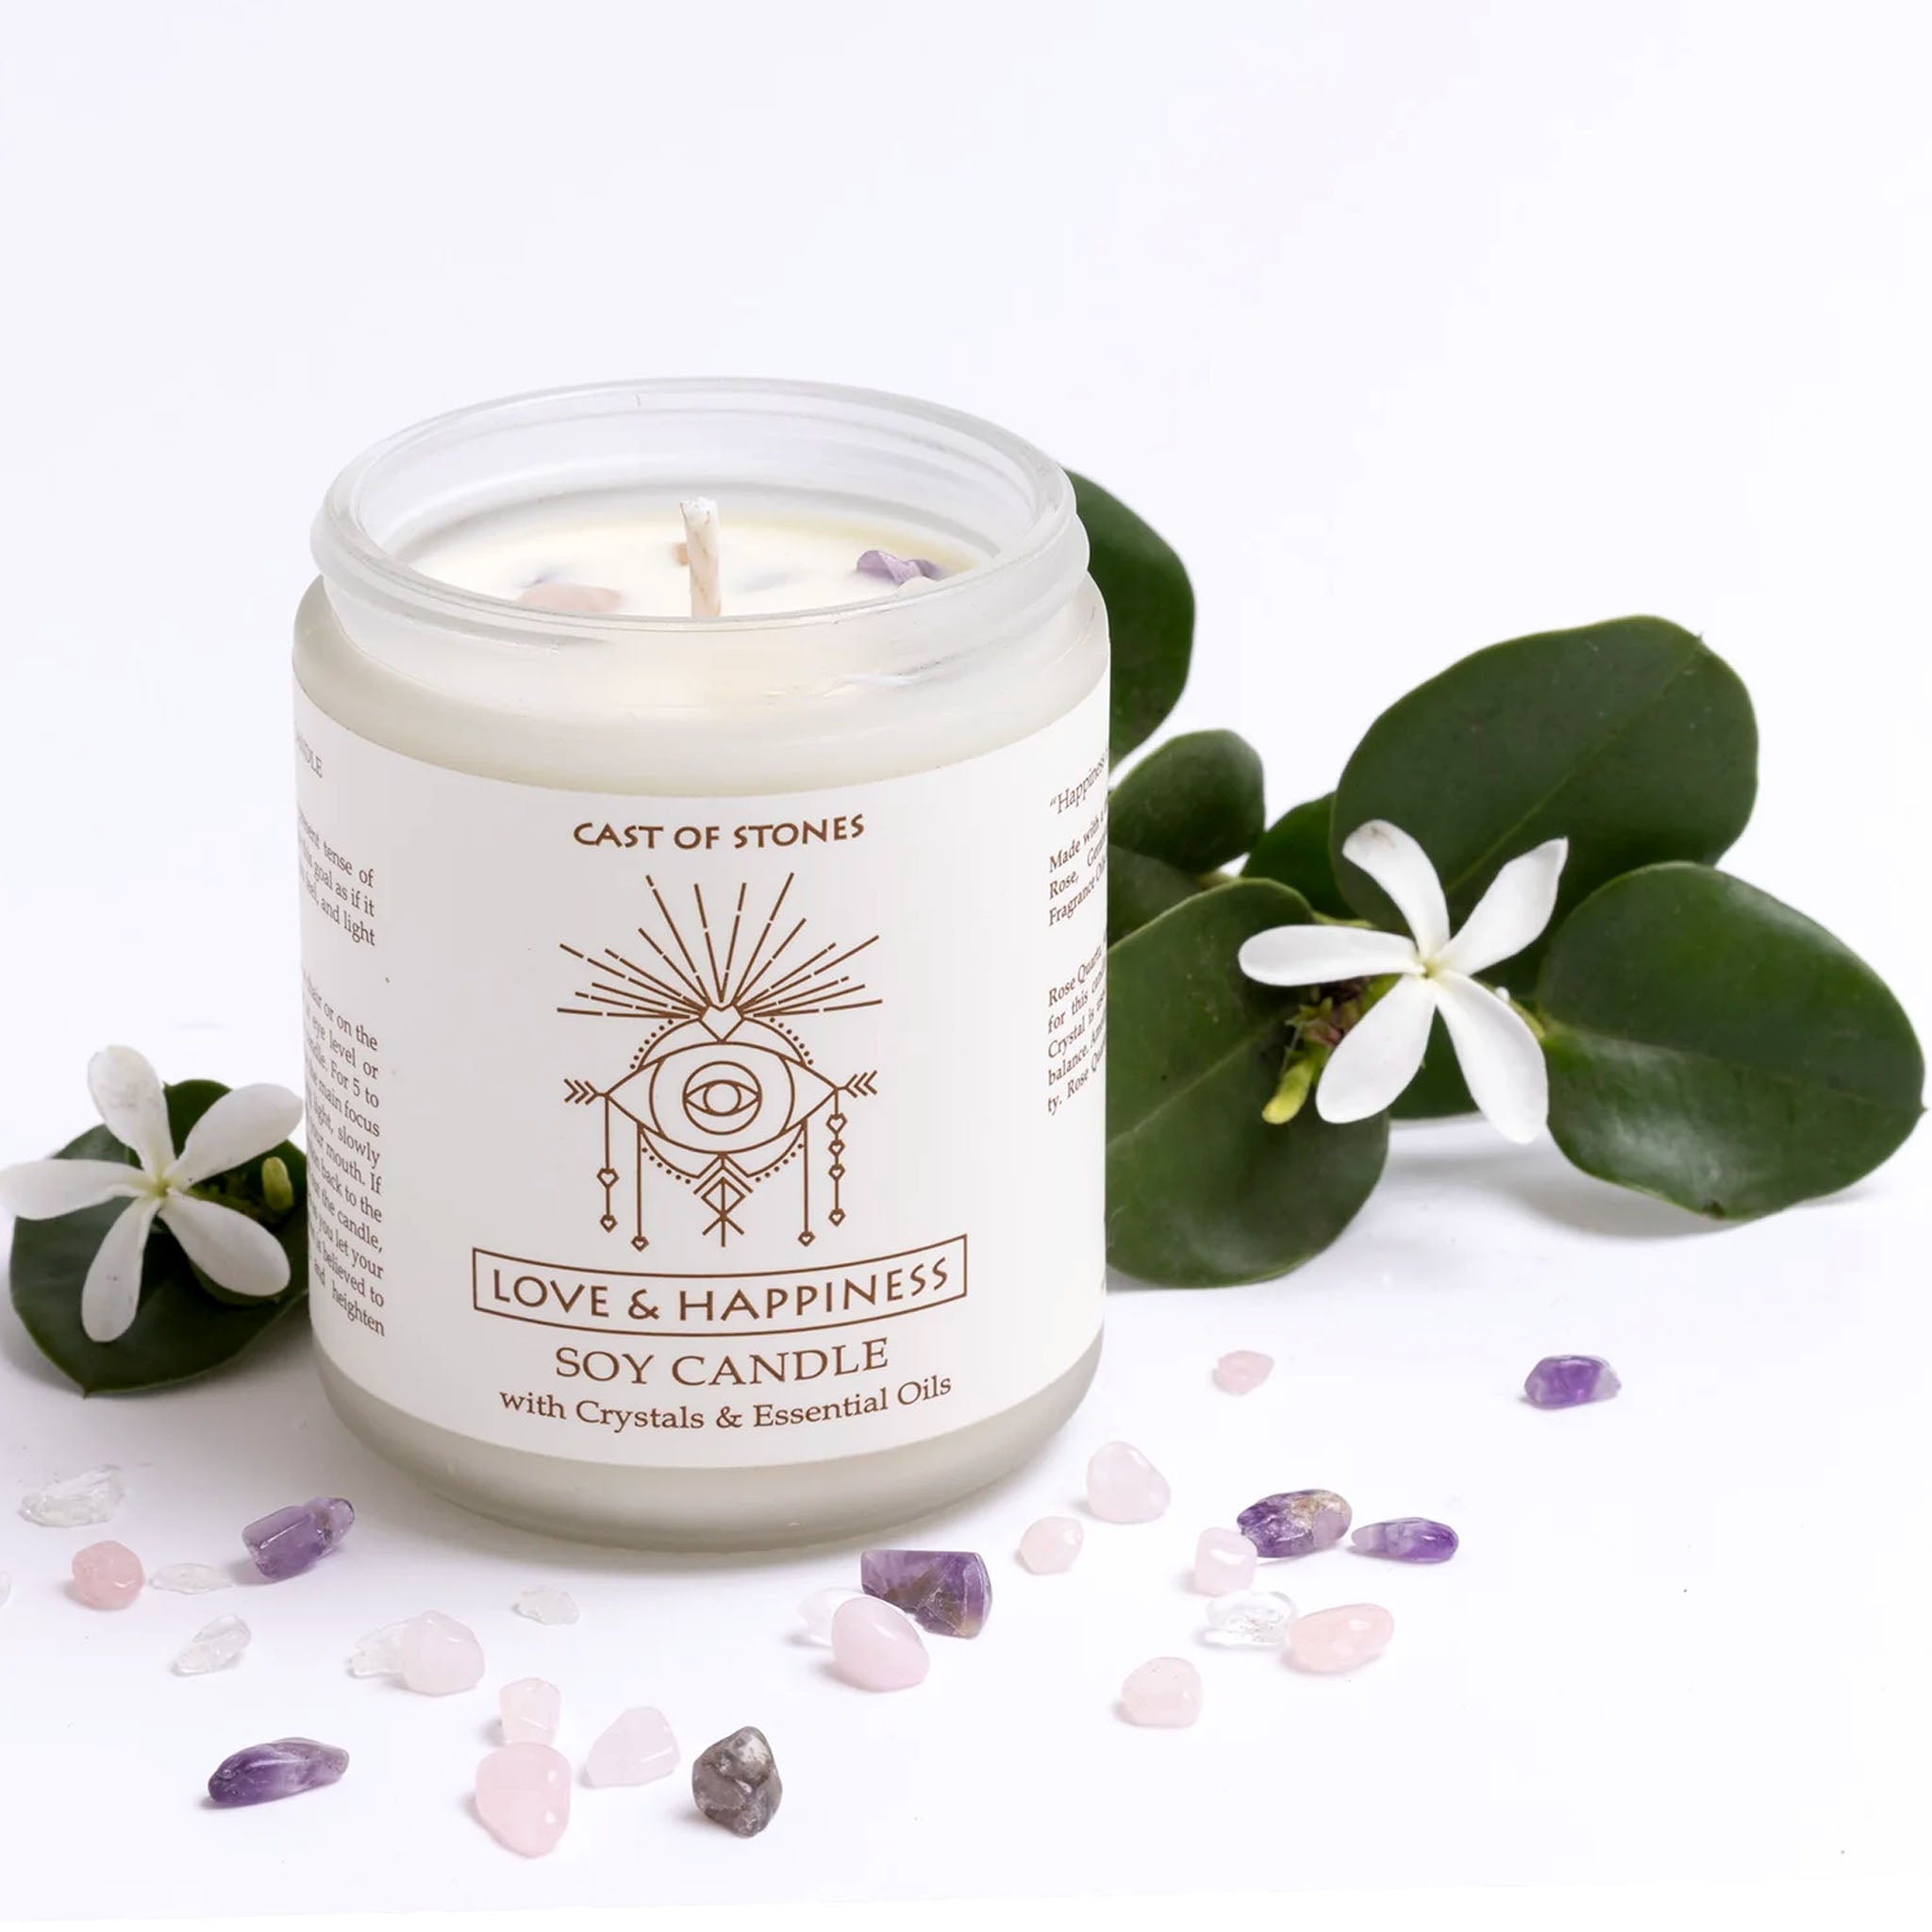 Love & Happiness Candle with Crystals and Essential Oils